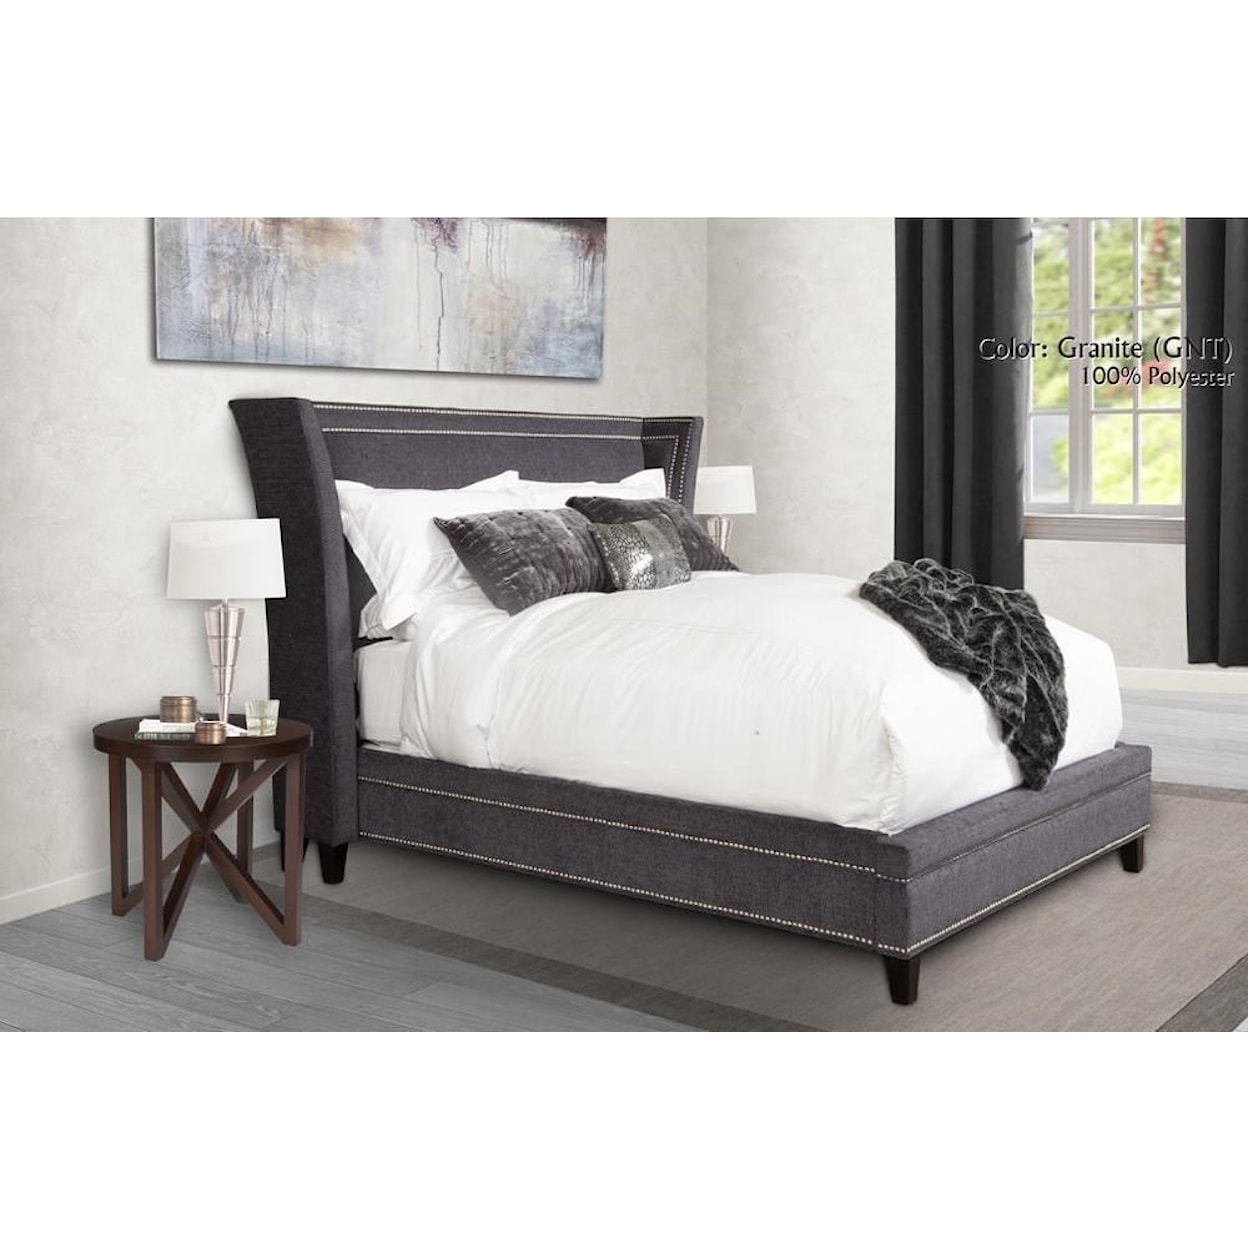 Parker Living Leah Queen Upholstered Bed